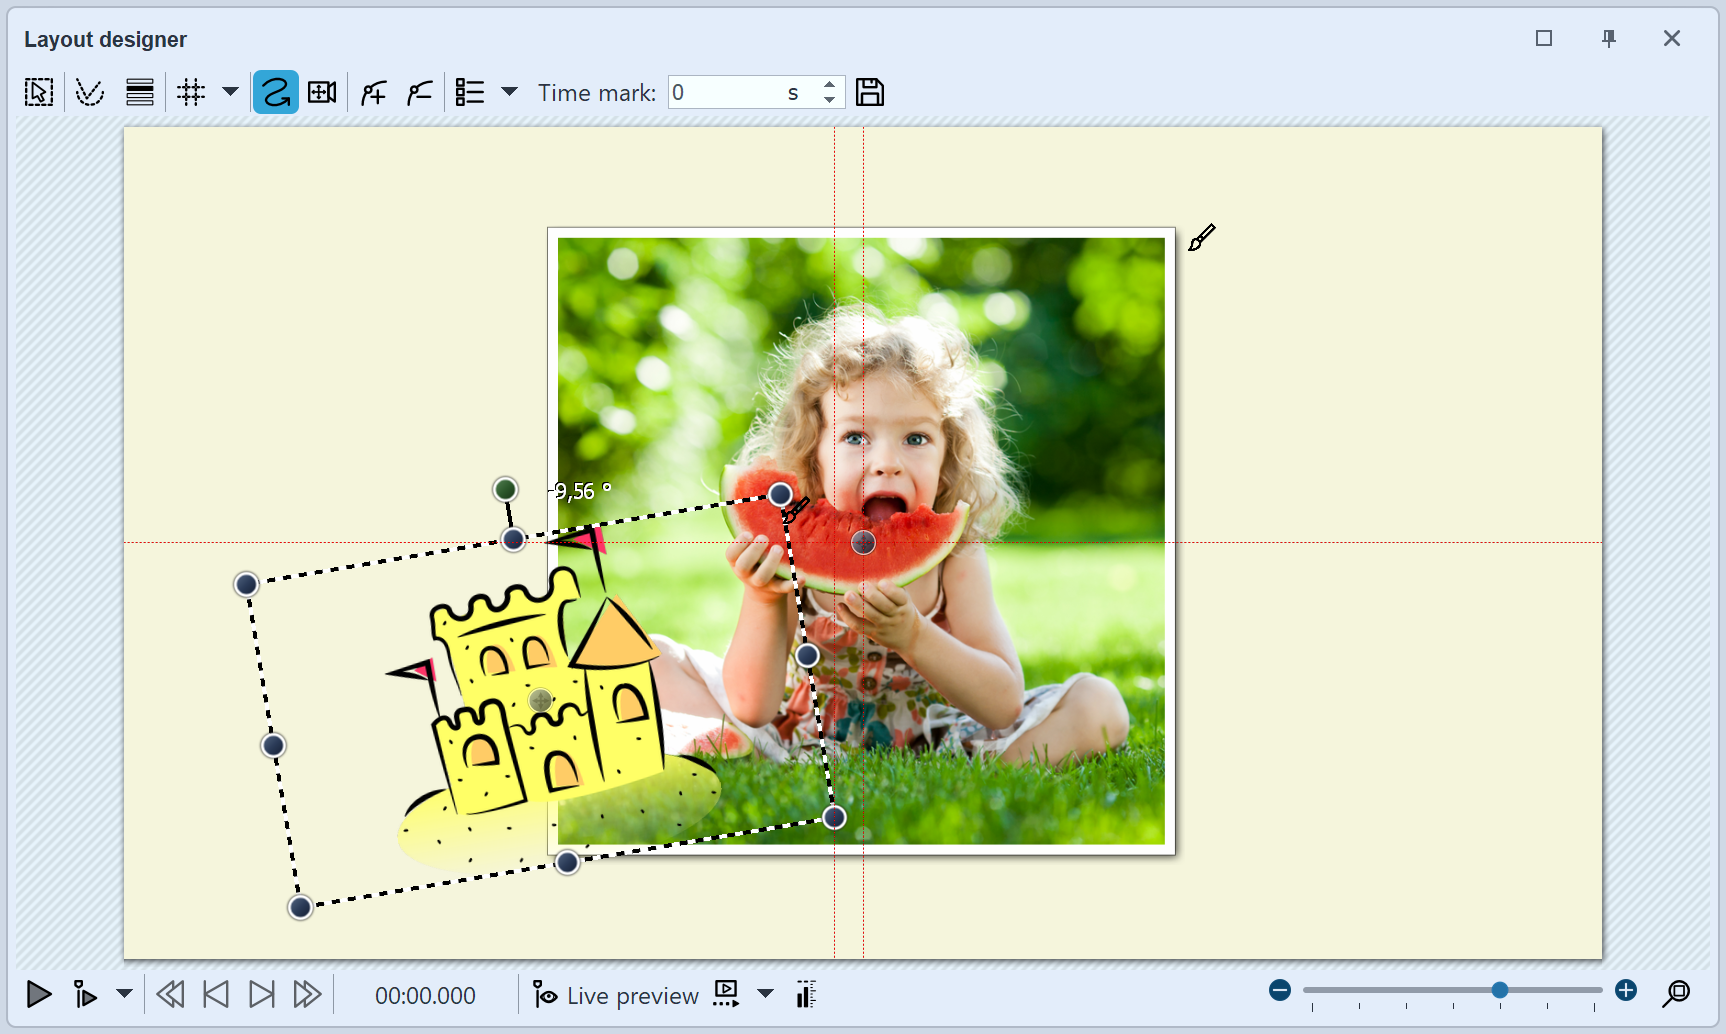 Positioning images in the Layout designer